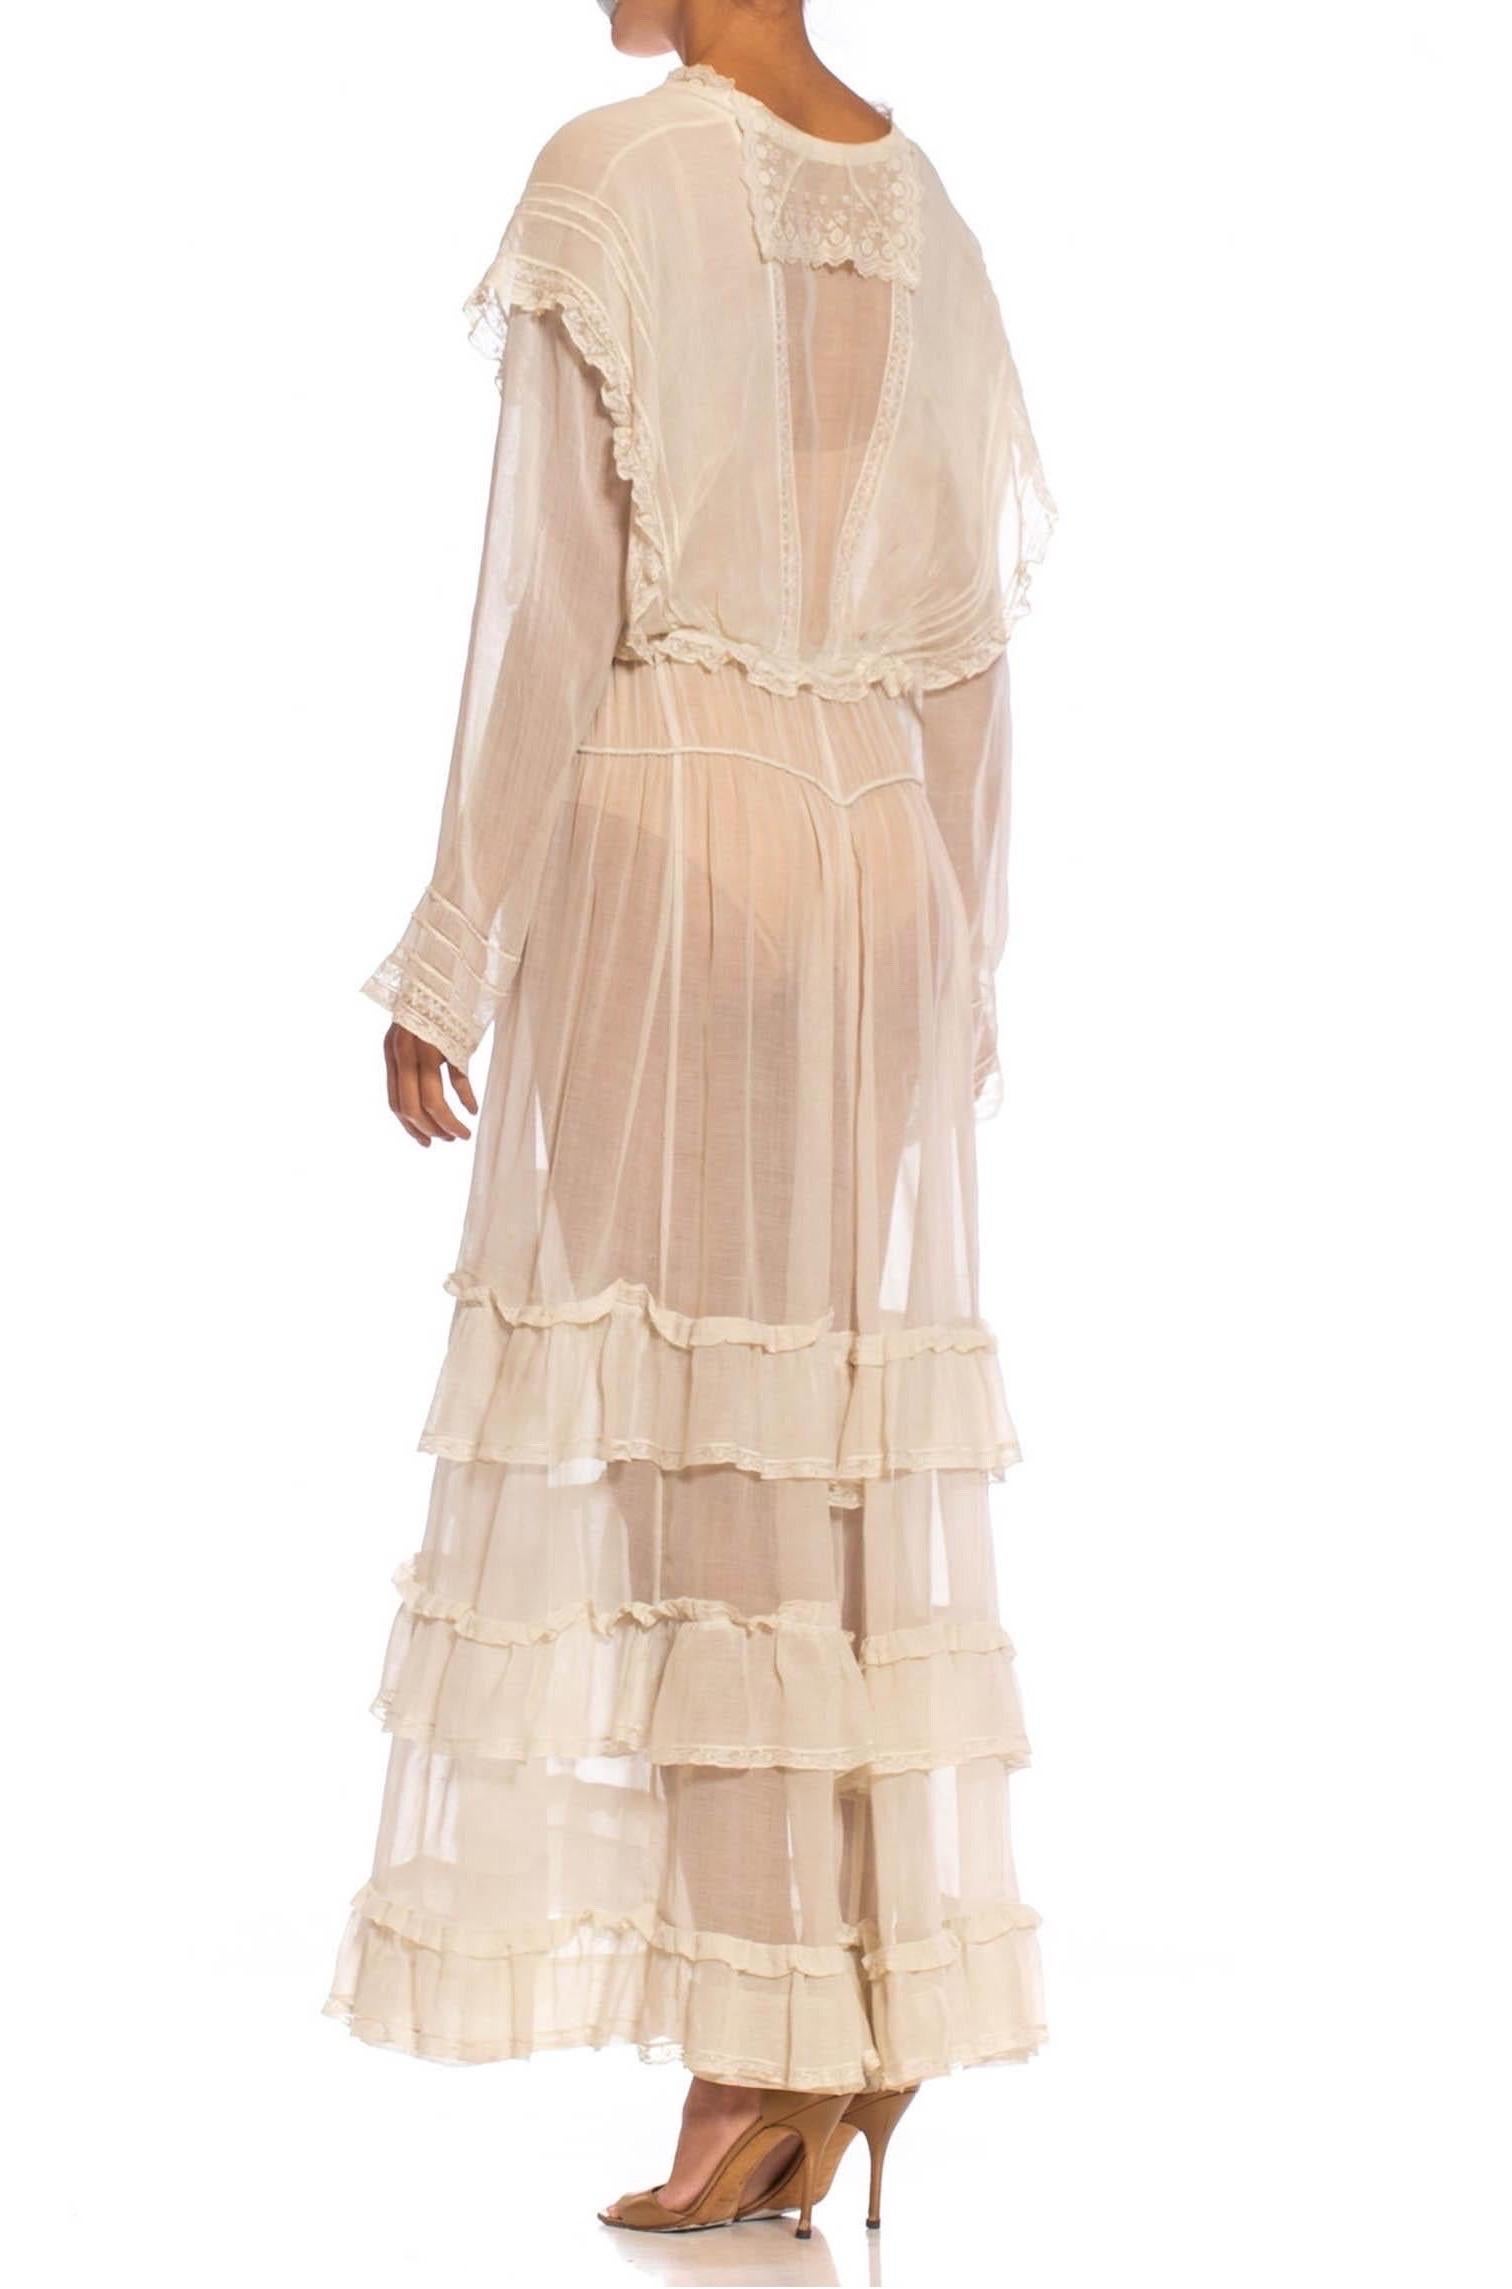 Edwardian Off White Organic Cotton Voile & Lace Long Sleeved Ruffled Tea Dress For Sale 5